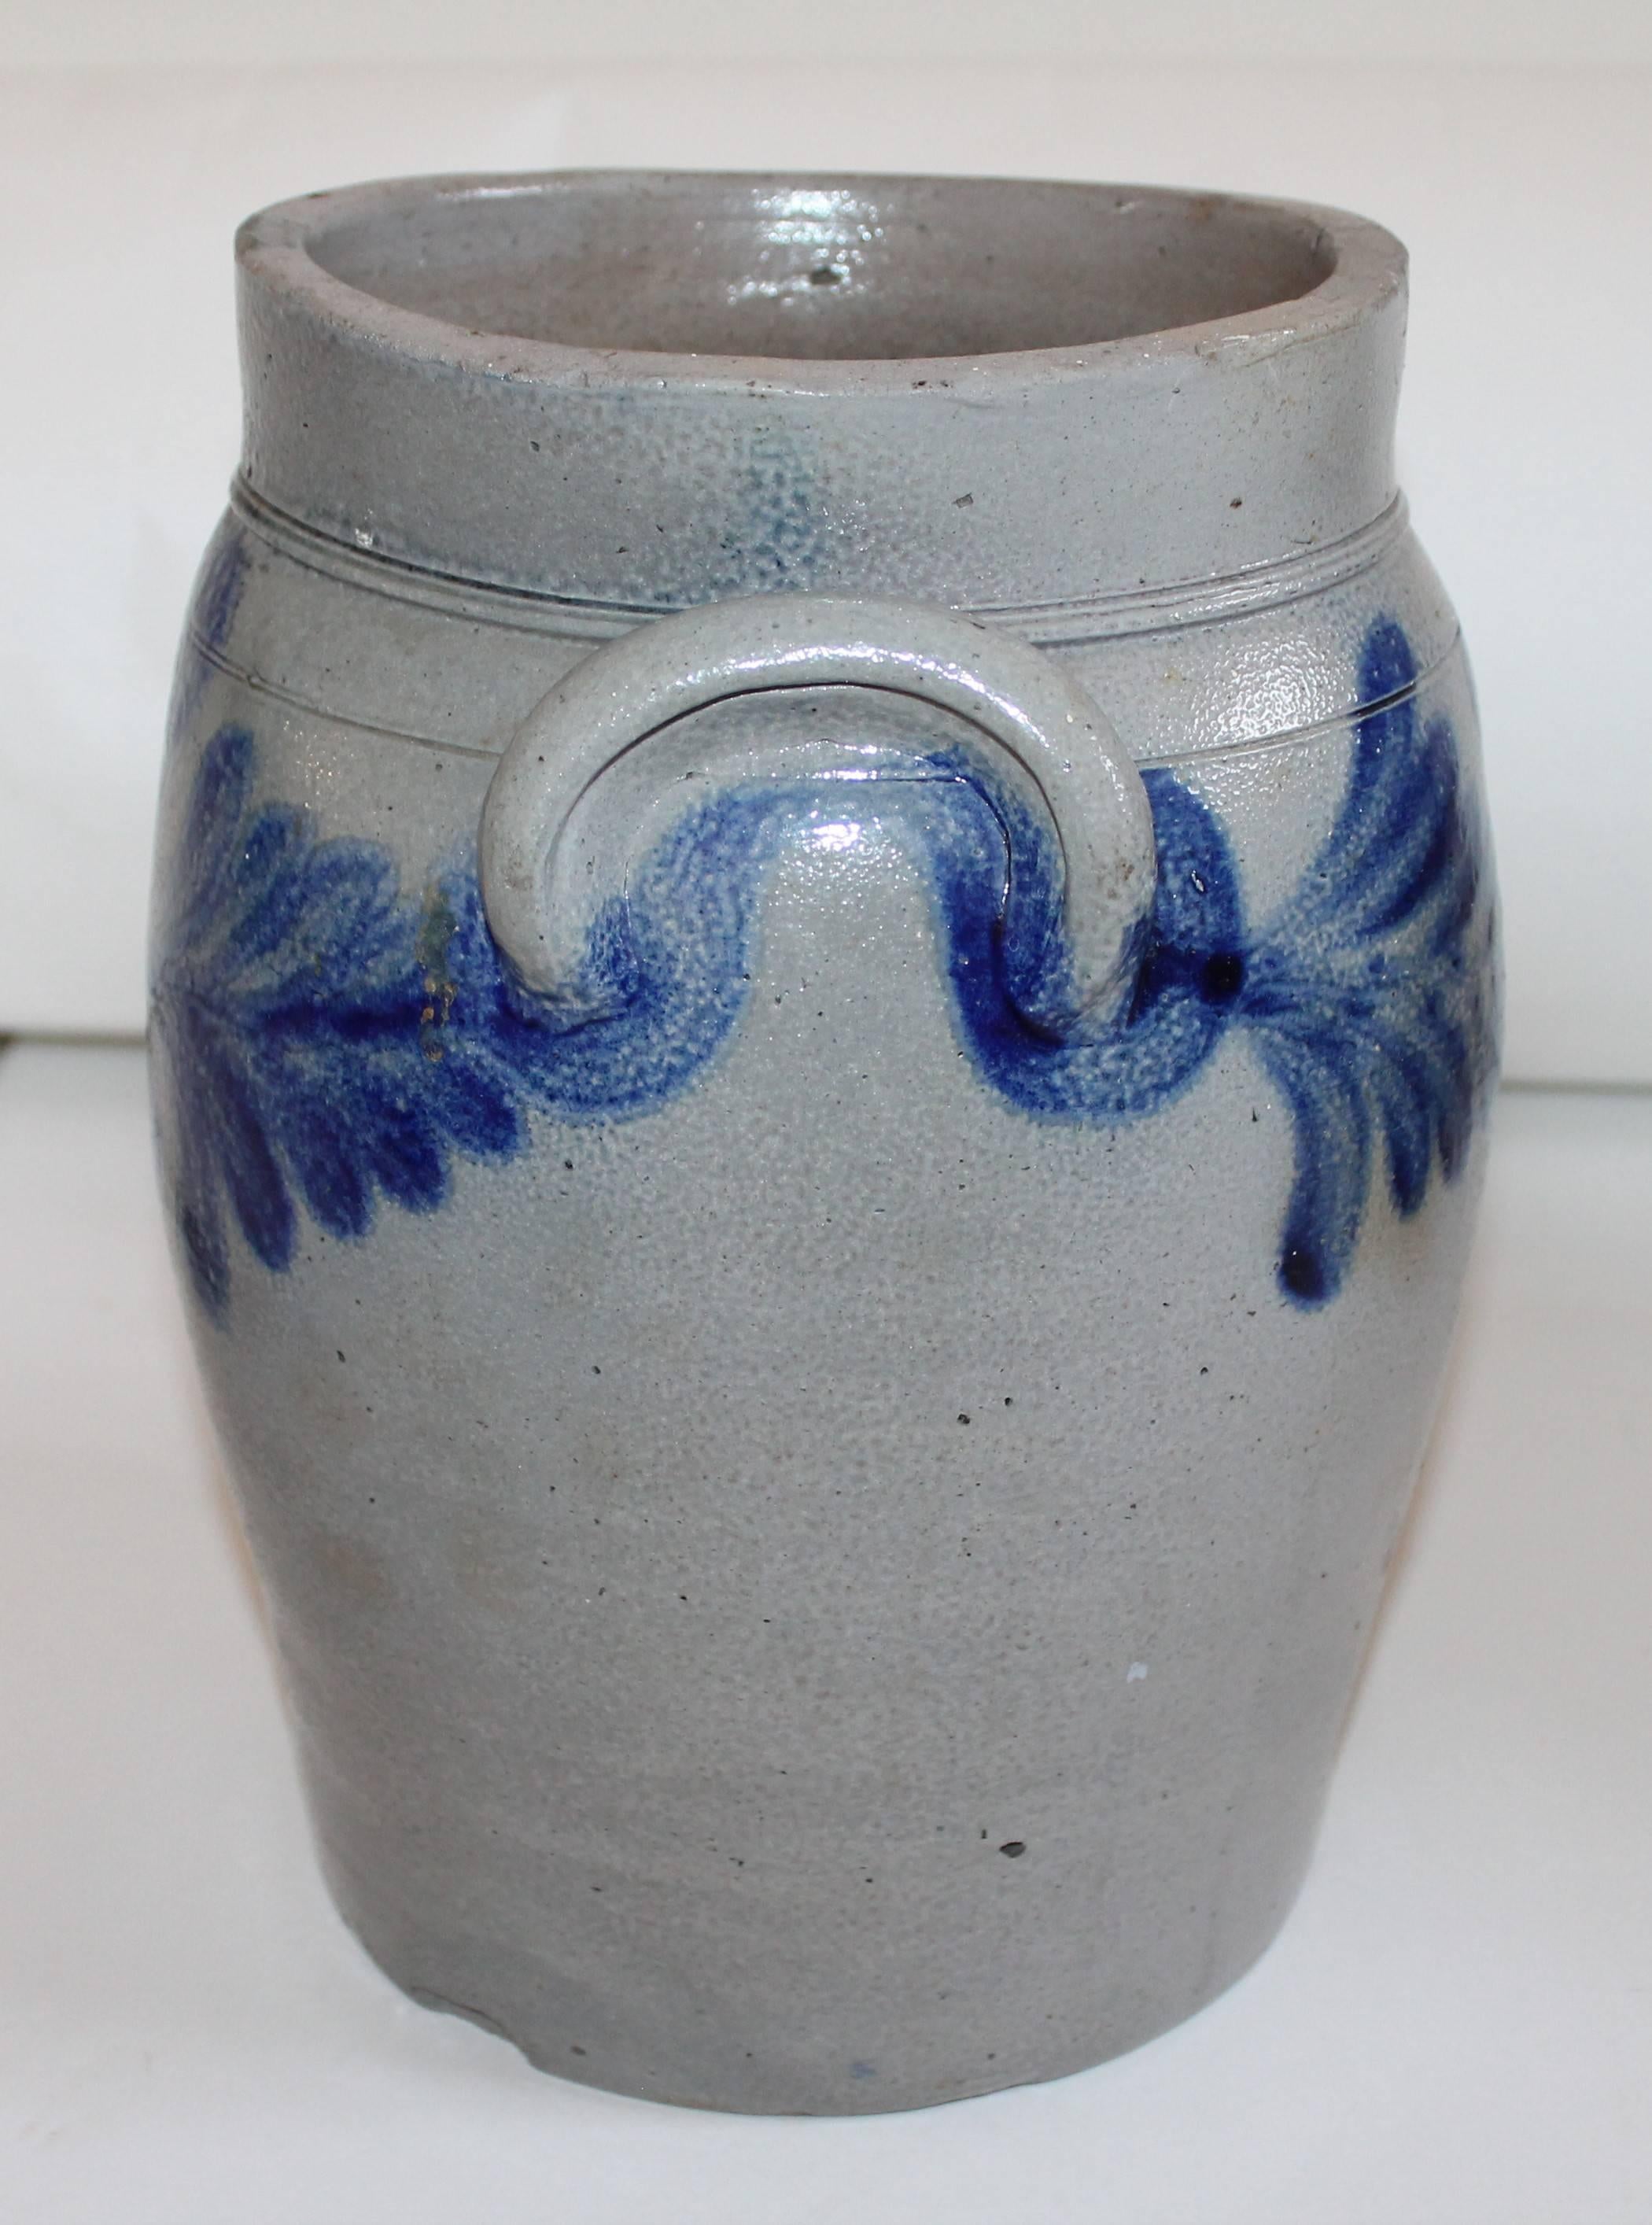 This fine decorated blue salt glaze two gallon and double handled crock is in great condition with minor small nicks in the glaze. The rich indigo blue glaze is super rich & fantastic! Great for fresh flowers.